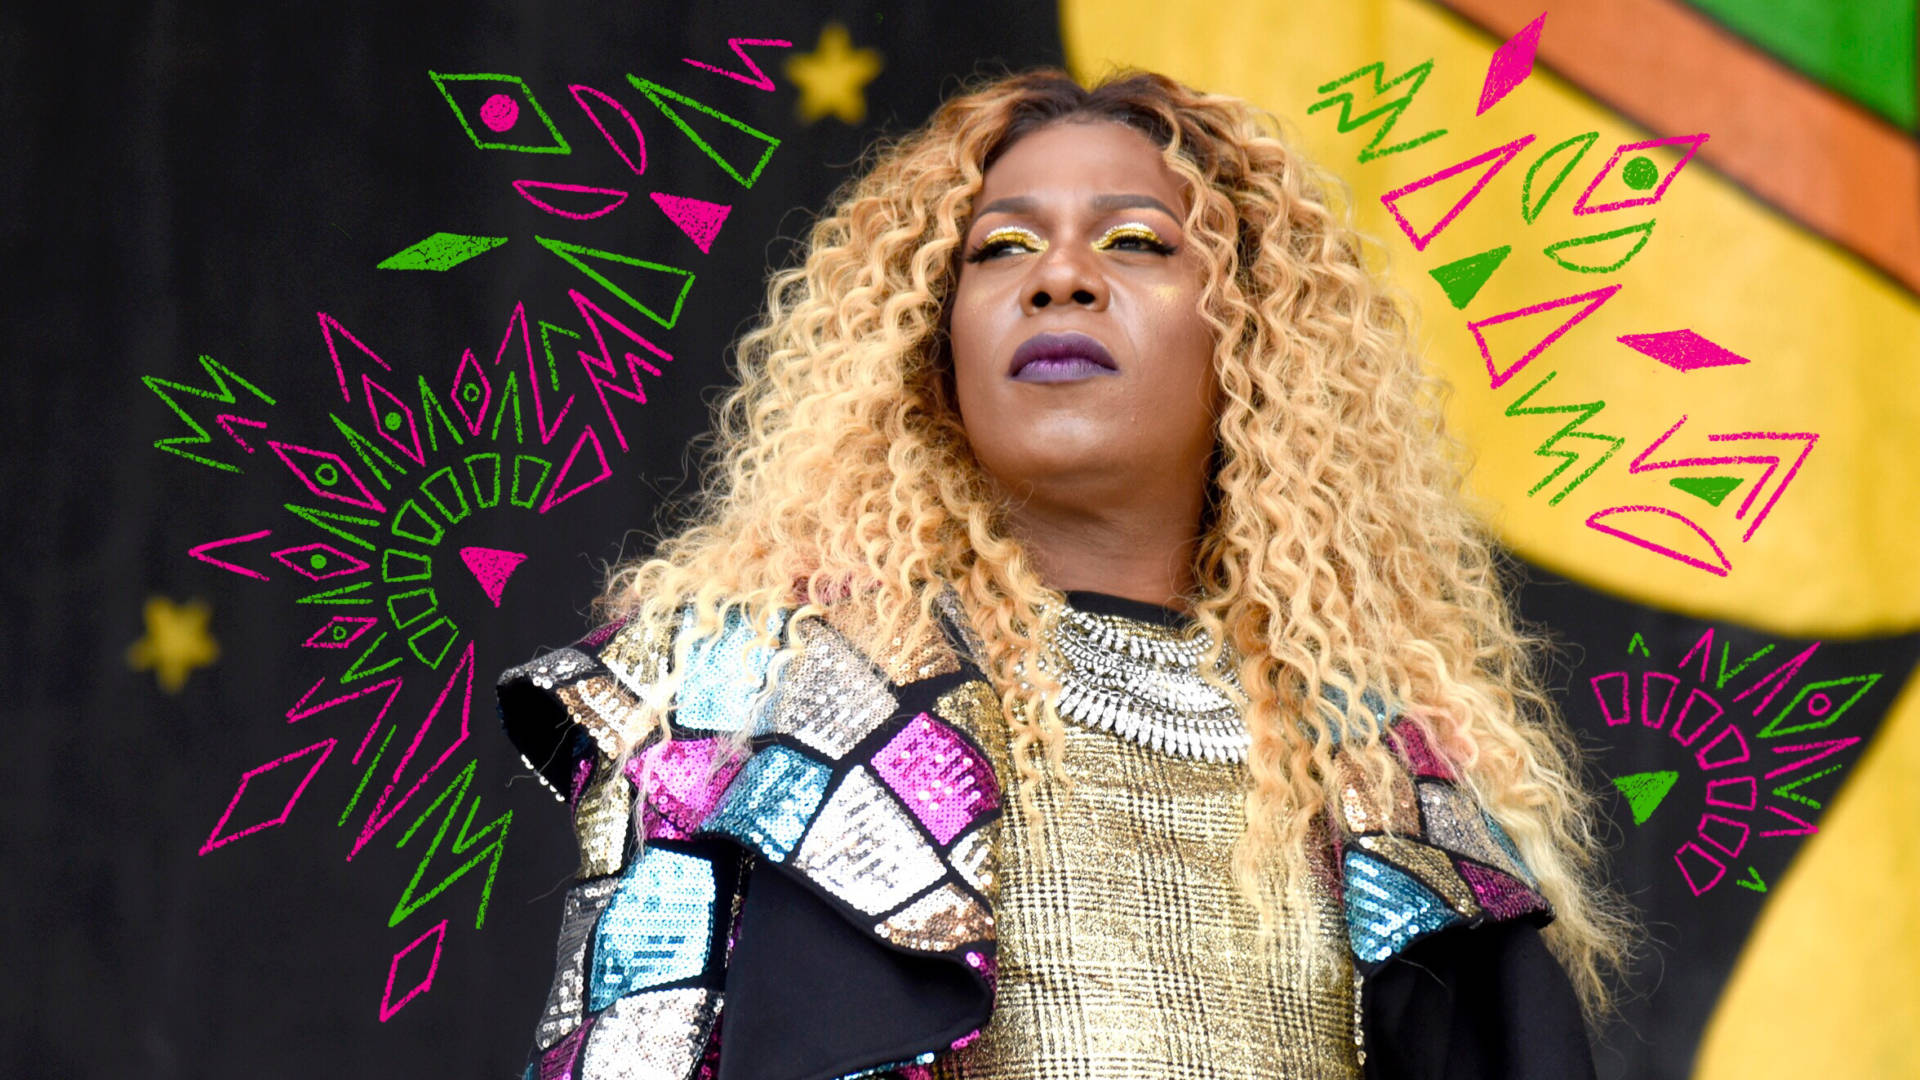 Big Freedia performs during the 2018 New Orleans Jazz &amp; Heritage Festival in New Orleans.